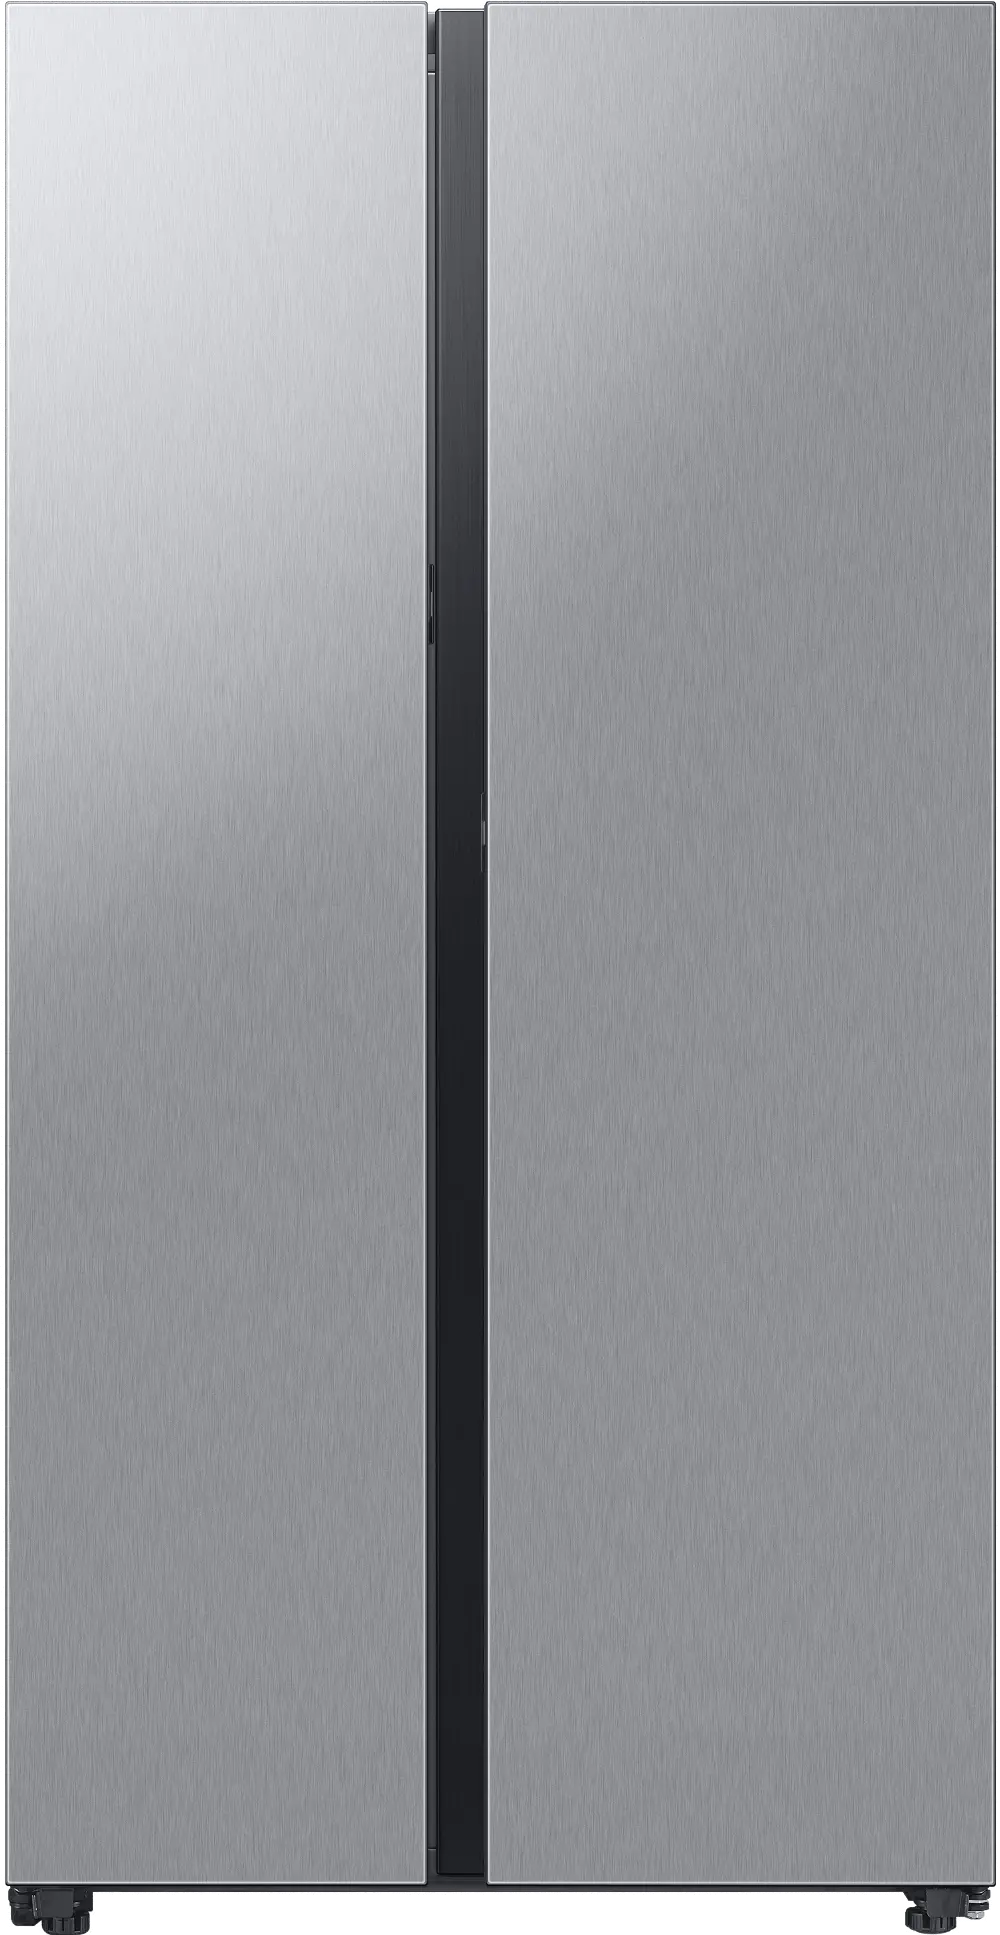 RS28CB7600QL Samsung Bespoke 28 cu ft Side-By-Side Refrigerator - Stainless Steel-1